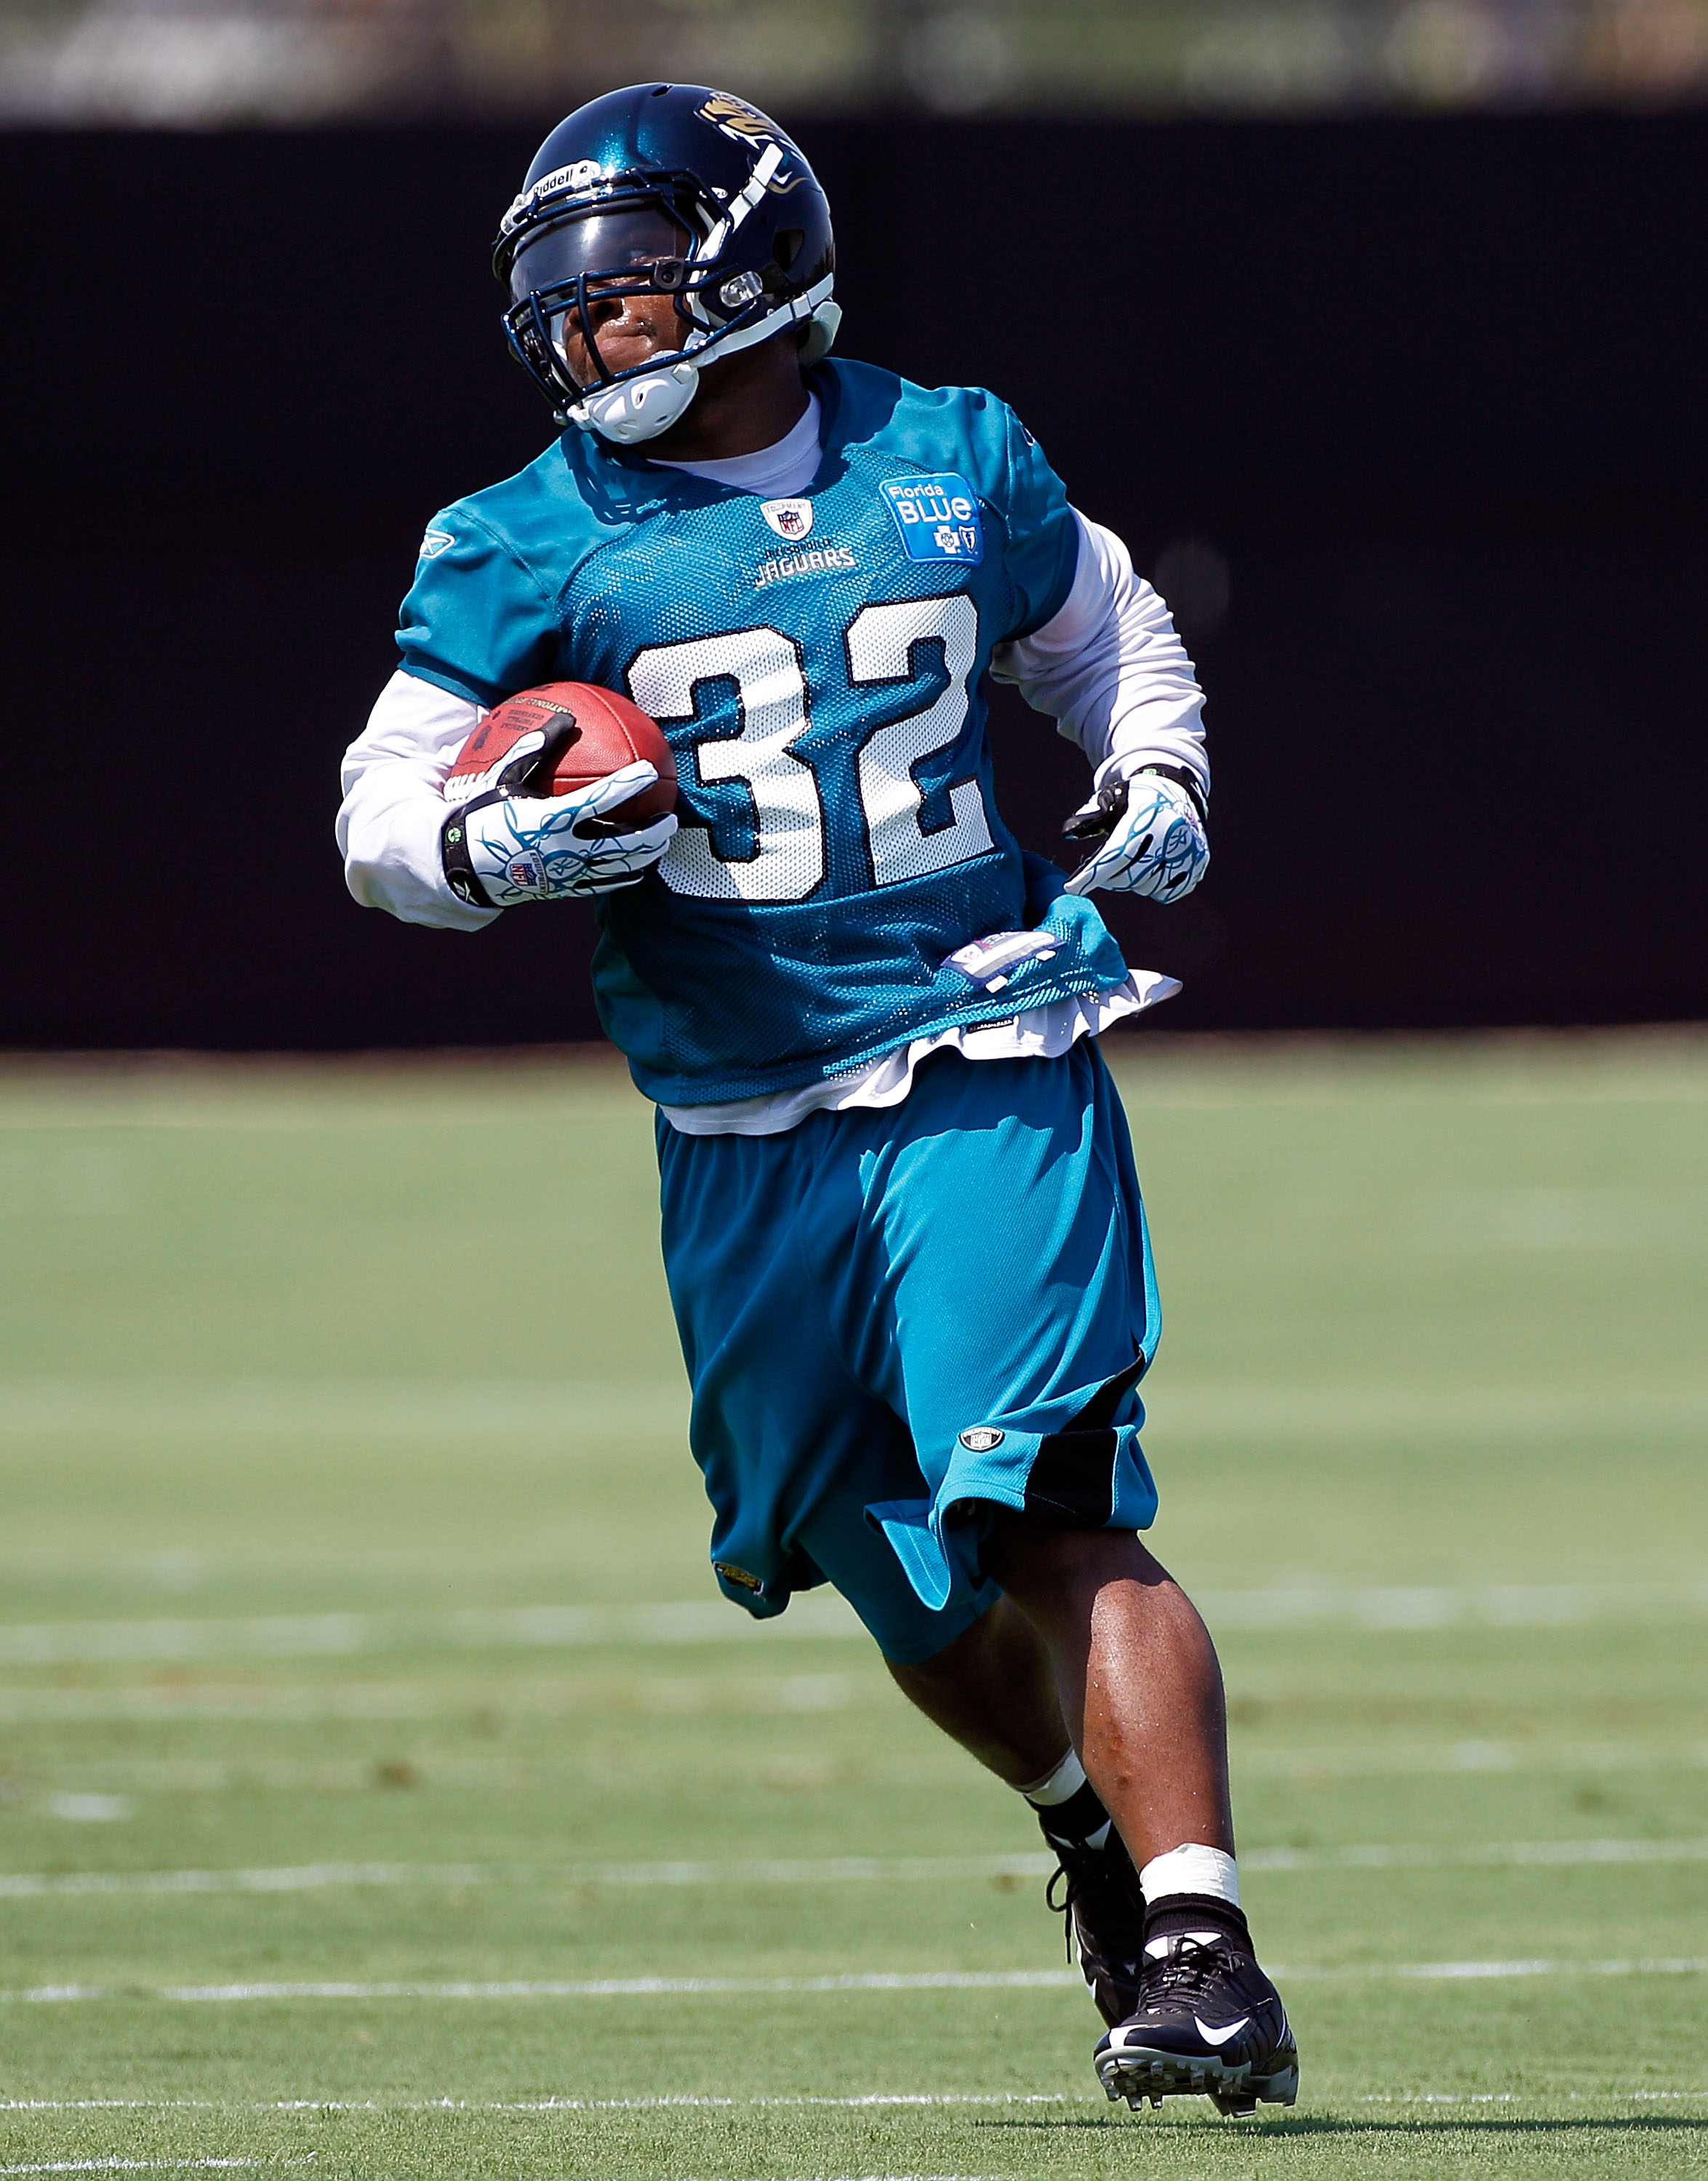 JACKSONVILLE, FL - JULY 30:  Maurice Jones-Drew 32 of the Jacksonville Jaguars during the first day of Training Camp at EverBank Field on July 30, 2010 in Jacksonville, Florida.  (Photo by Sam Greenwood/Getty Images)